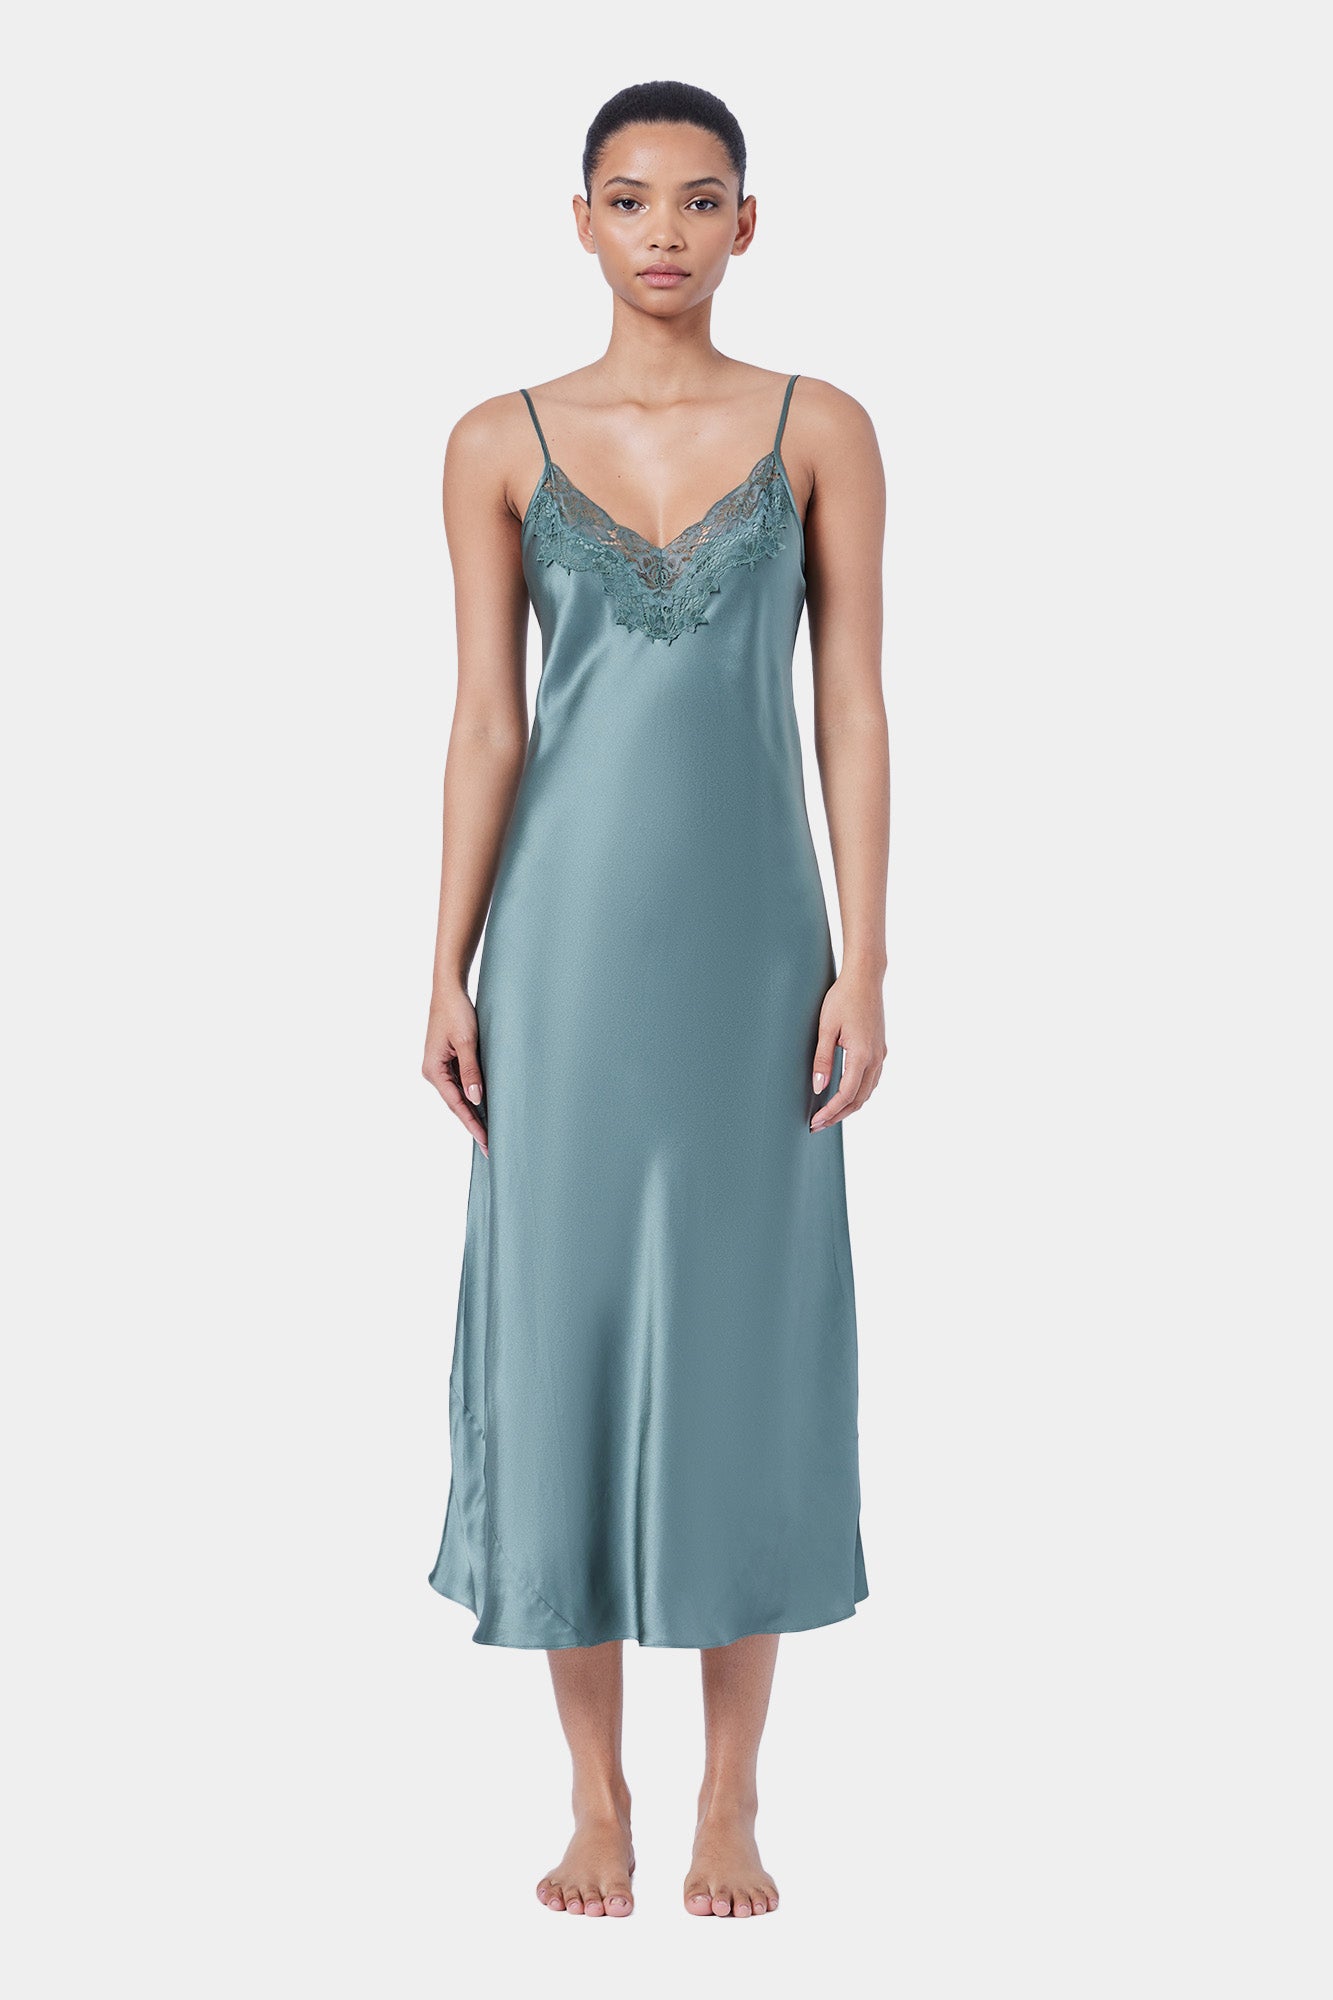 The Silk Lace Slip By GINIA In Moss